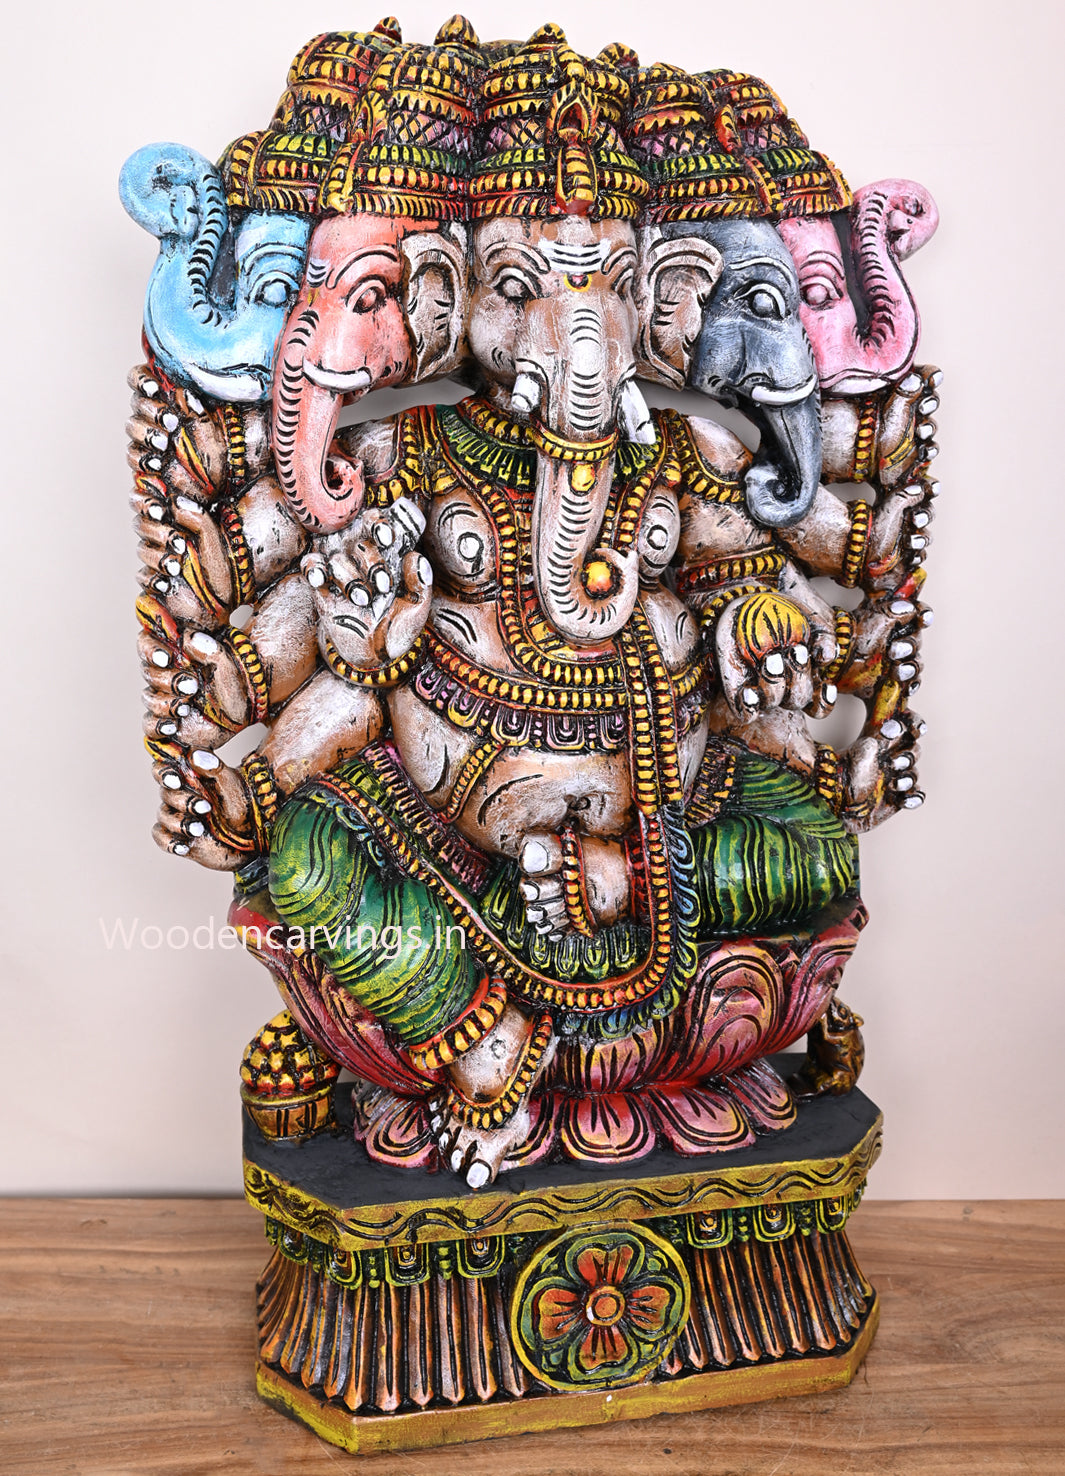 Ten Hands With Five Heads Wooden Panchamugha Ganapathi Seated on Lotus Handmade Decorative Sculpture 37.5"